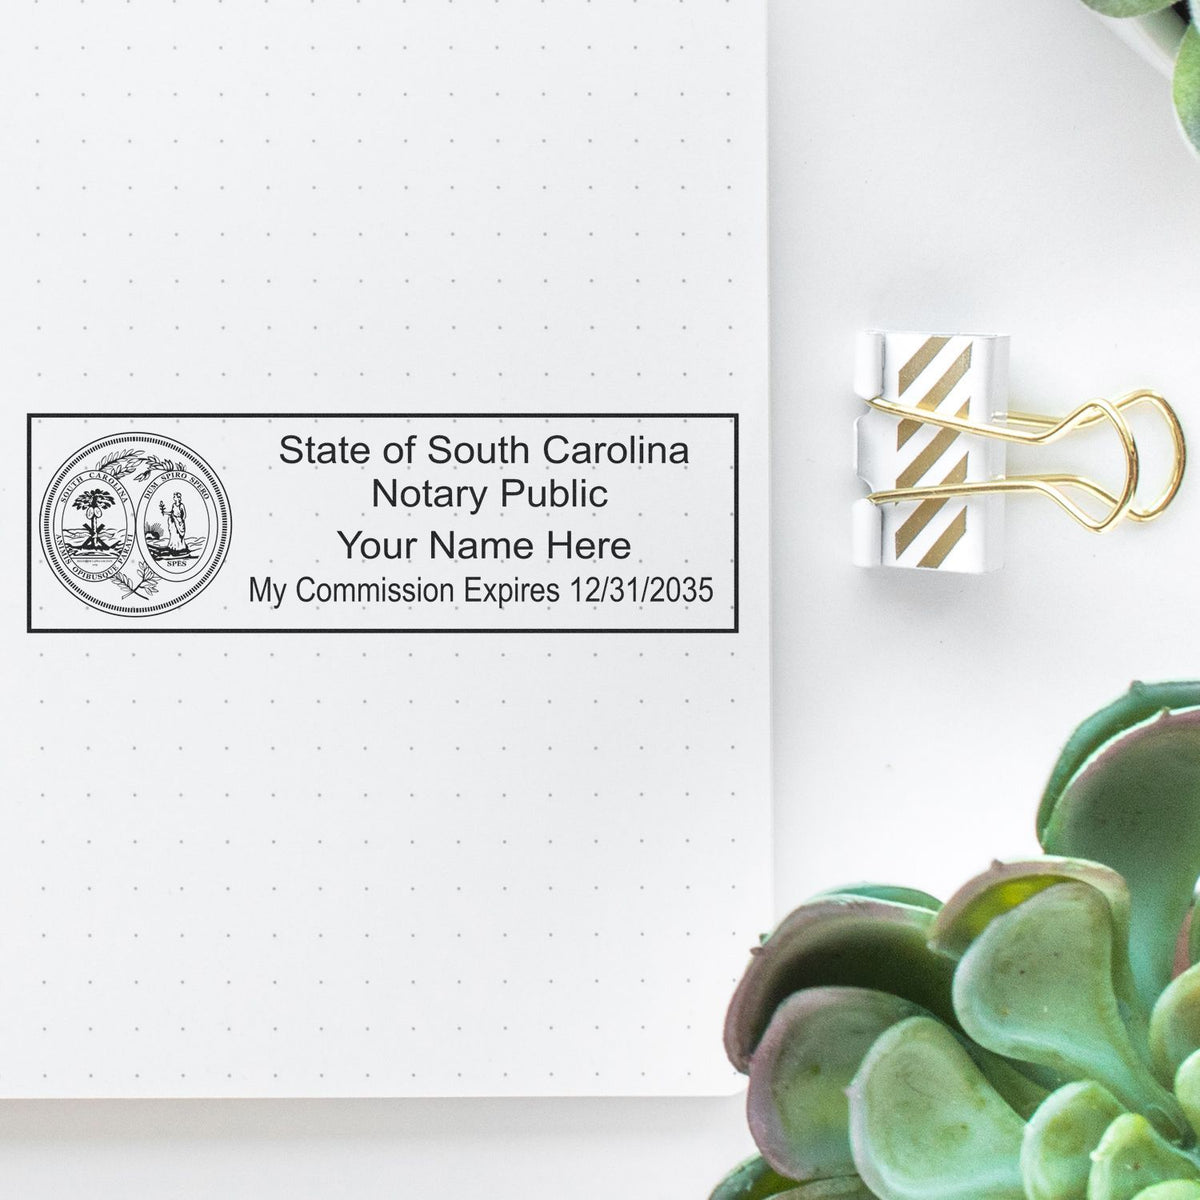 A photograph of the Wooden Handle South Carolina State Seal Notary Public Stamp stamp impression reveals a vivid, professional image of the on paper.